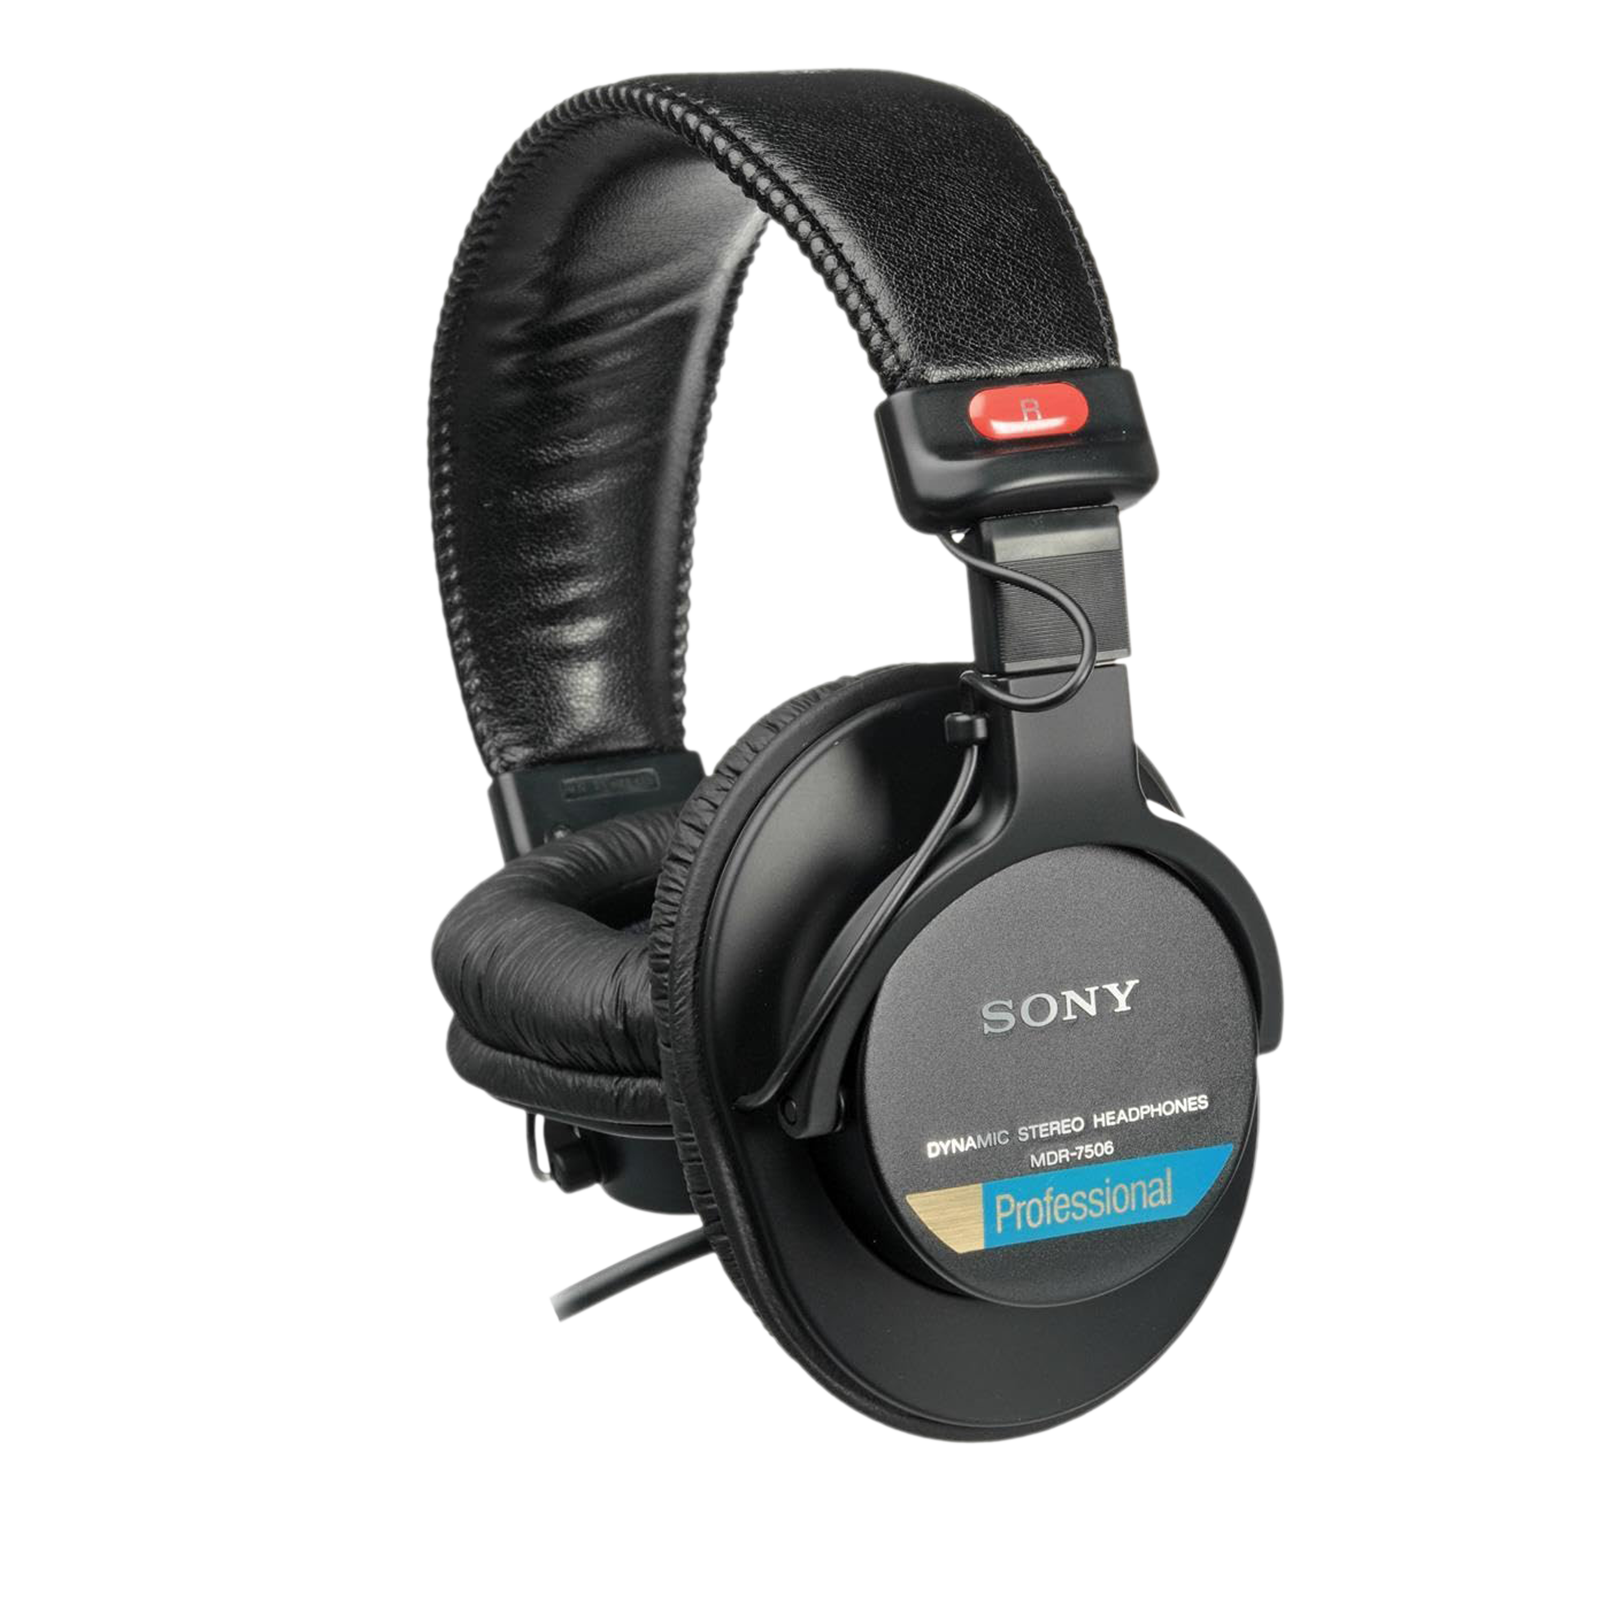 SONY MDR-7506 Wired Headphone with Mic (On Ear, Black)